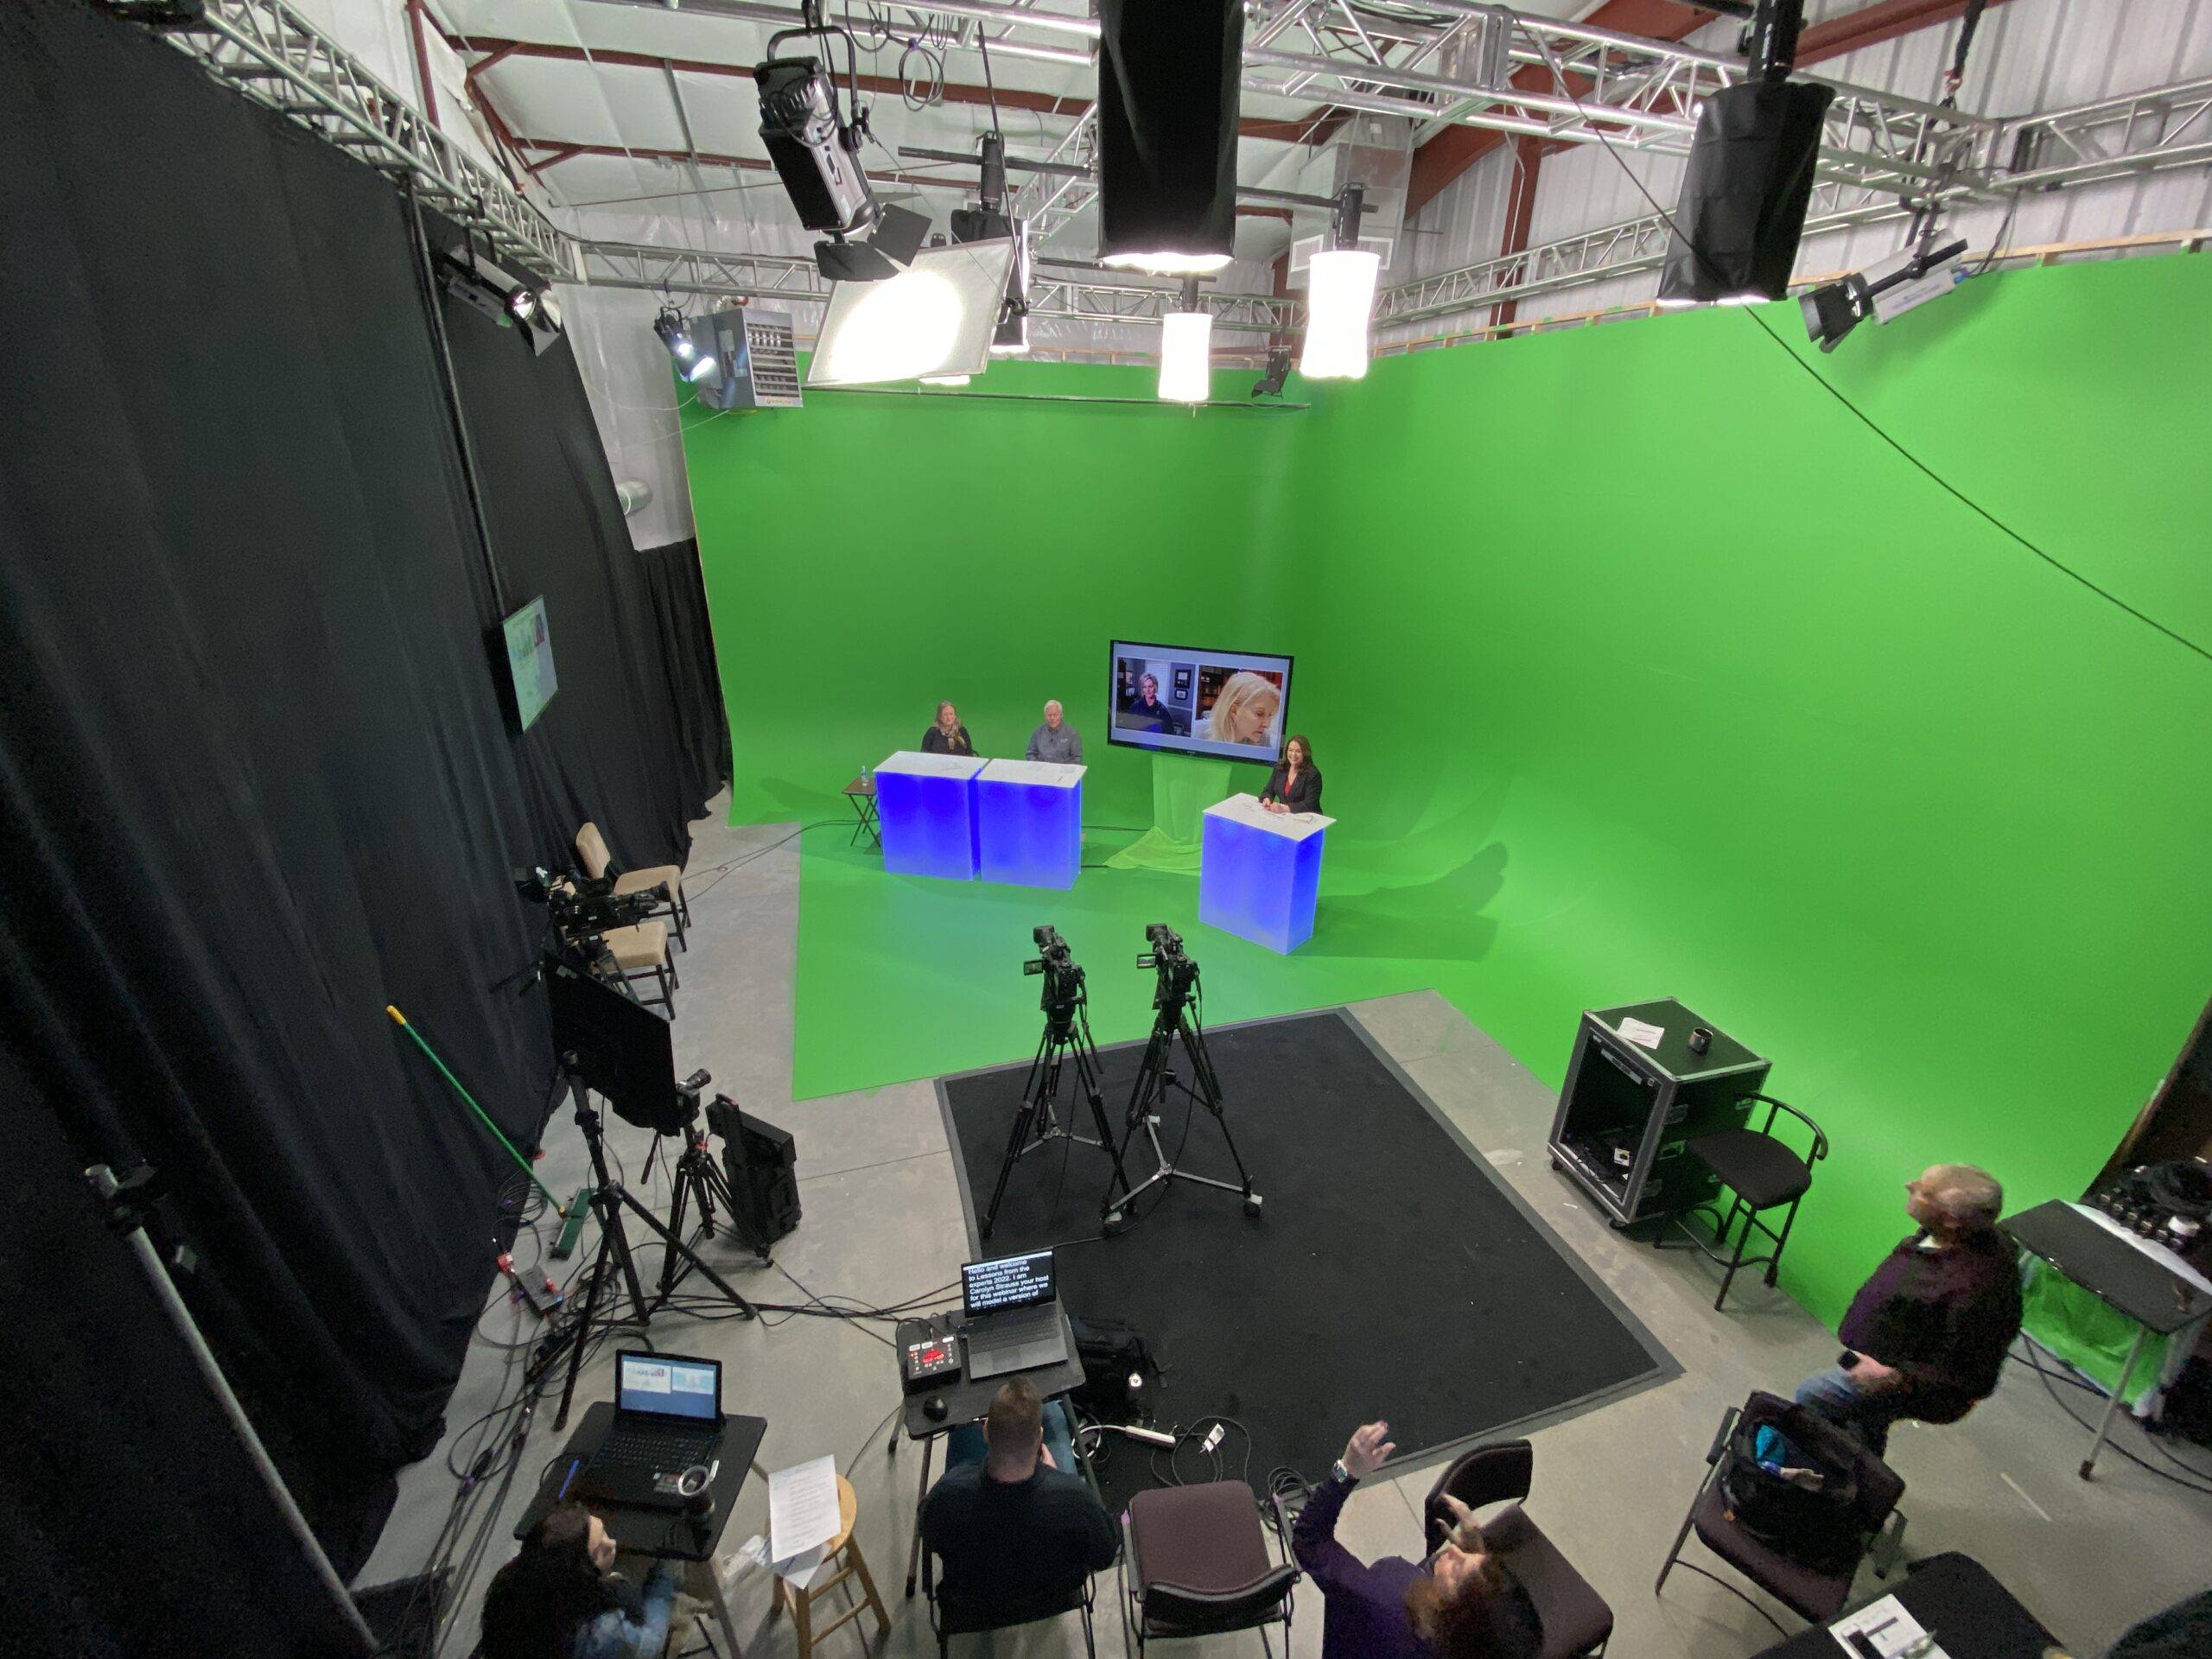 Virtual Stage Sets - Denver, CO - Large Green Screen for Virtual and Hybrid Events - ImageAV